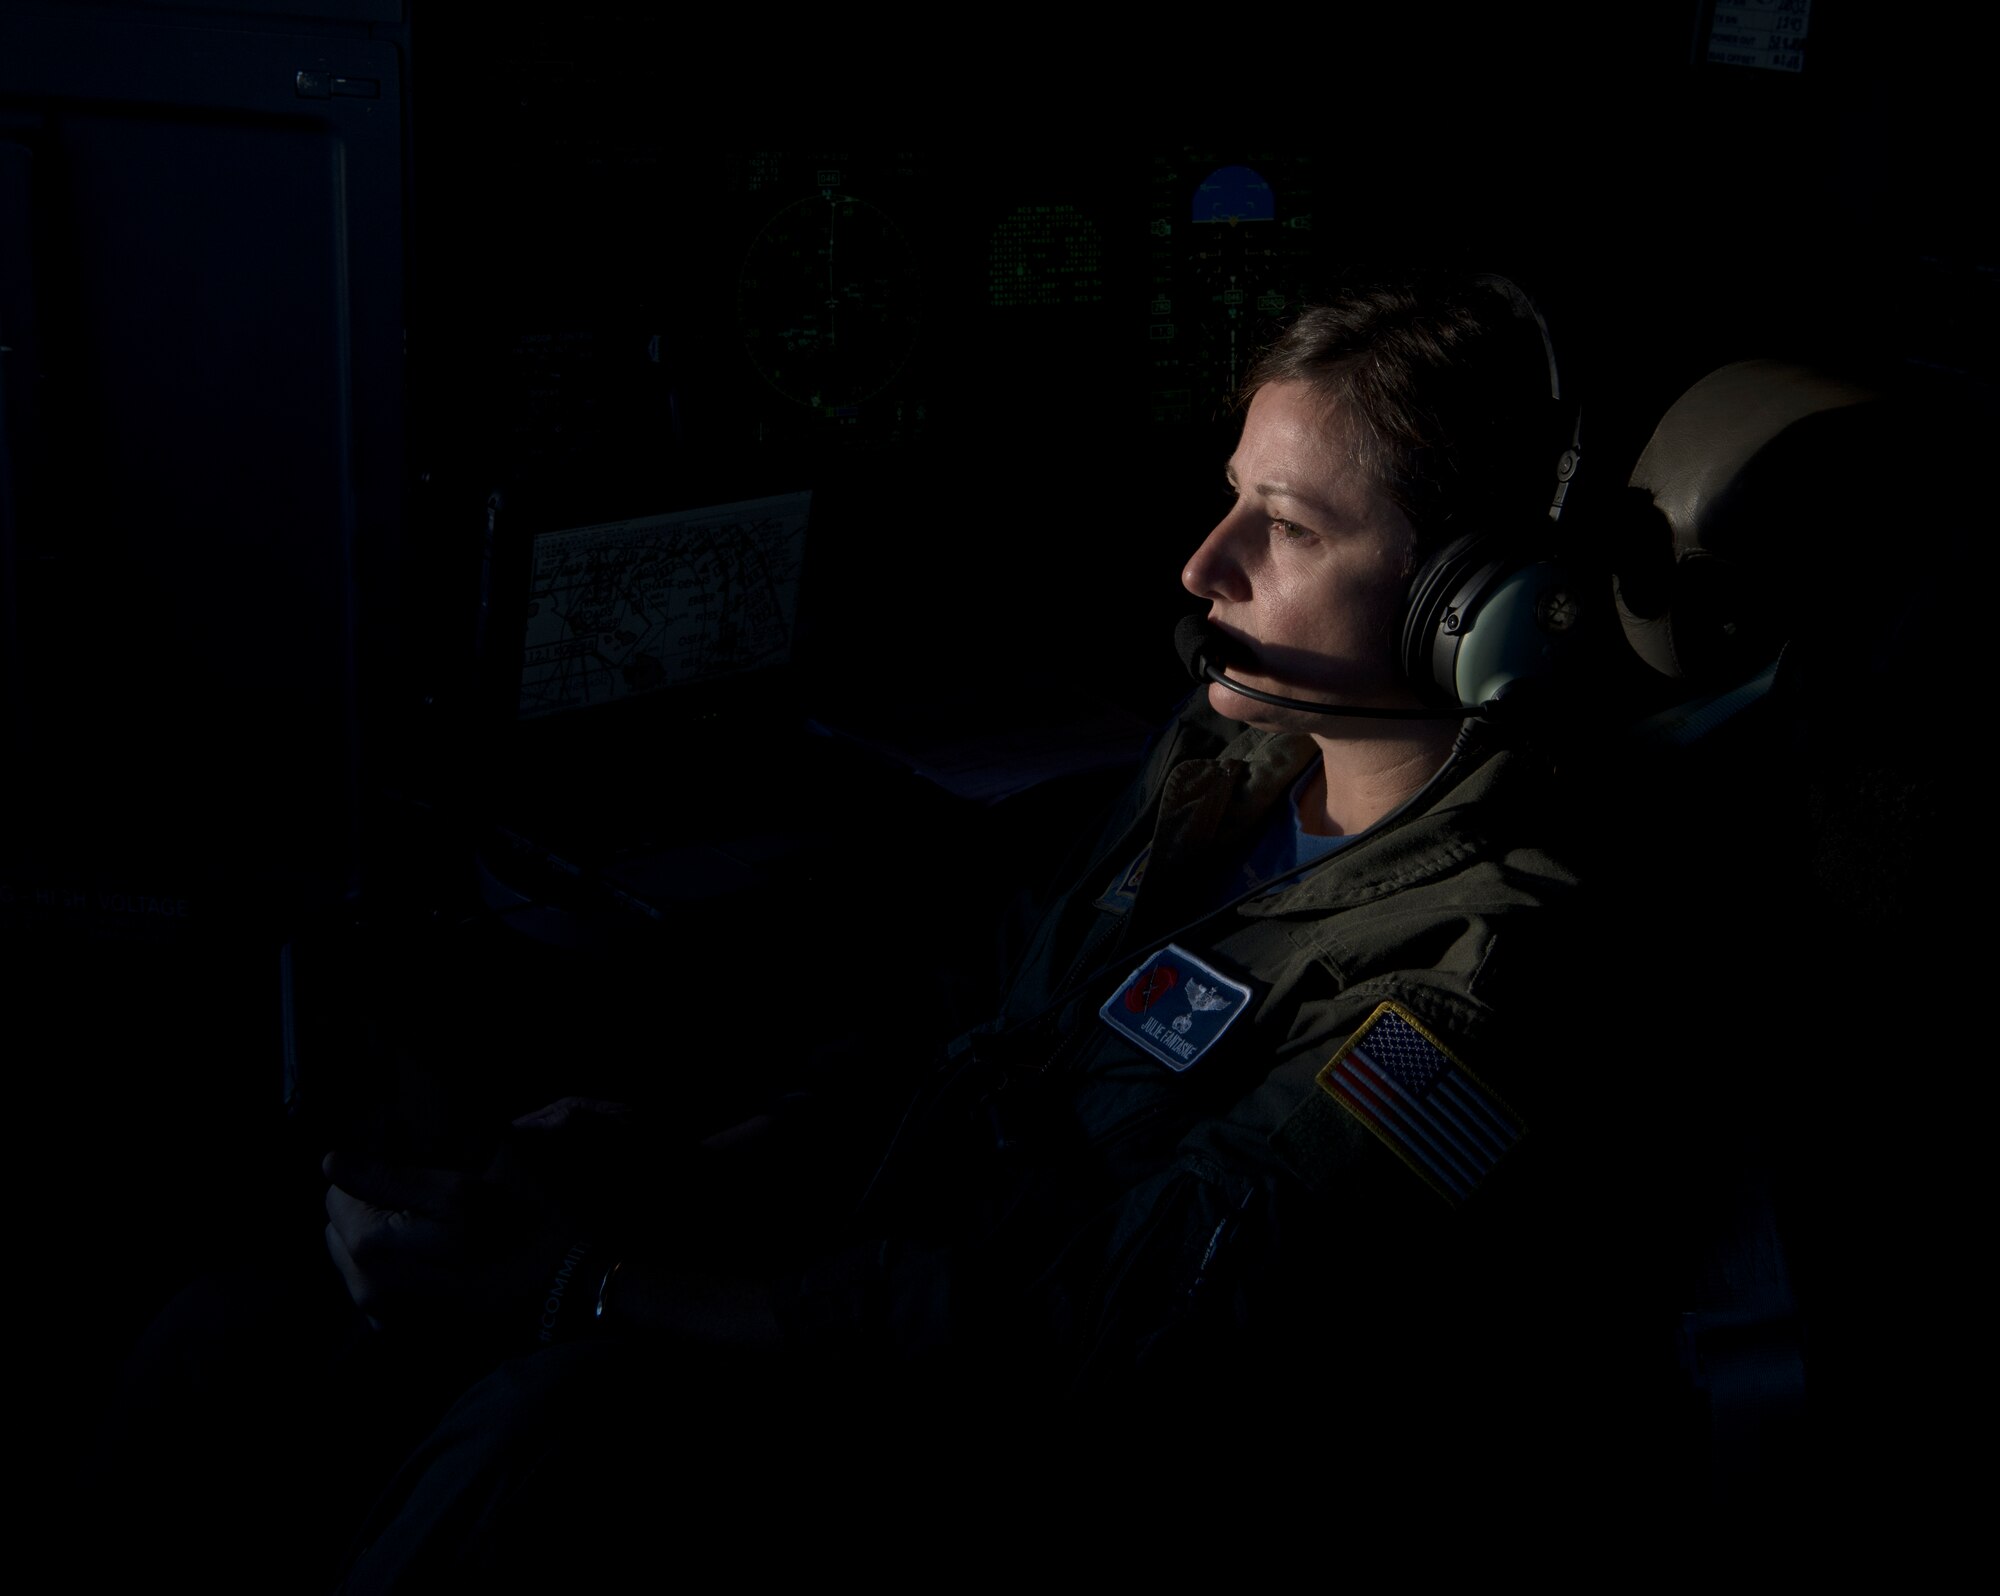 Capt. Julie Fantaske, navigator for the 53rd Weather Reconnaissance Squadron at Keesler Air Force Base Miss., looks on as her pilot crew members steer through Hurricane Douglas from Barbers Point Kapolei, Hawaii, July 26, 2020. The 53rd WRS is part of the Air Force Reserve 403rd Wing and is the only unit of its kind in the entire Department of Defense. (U.S. Air Force Photo by Senior Airman Kristen Pittman)